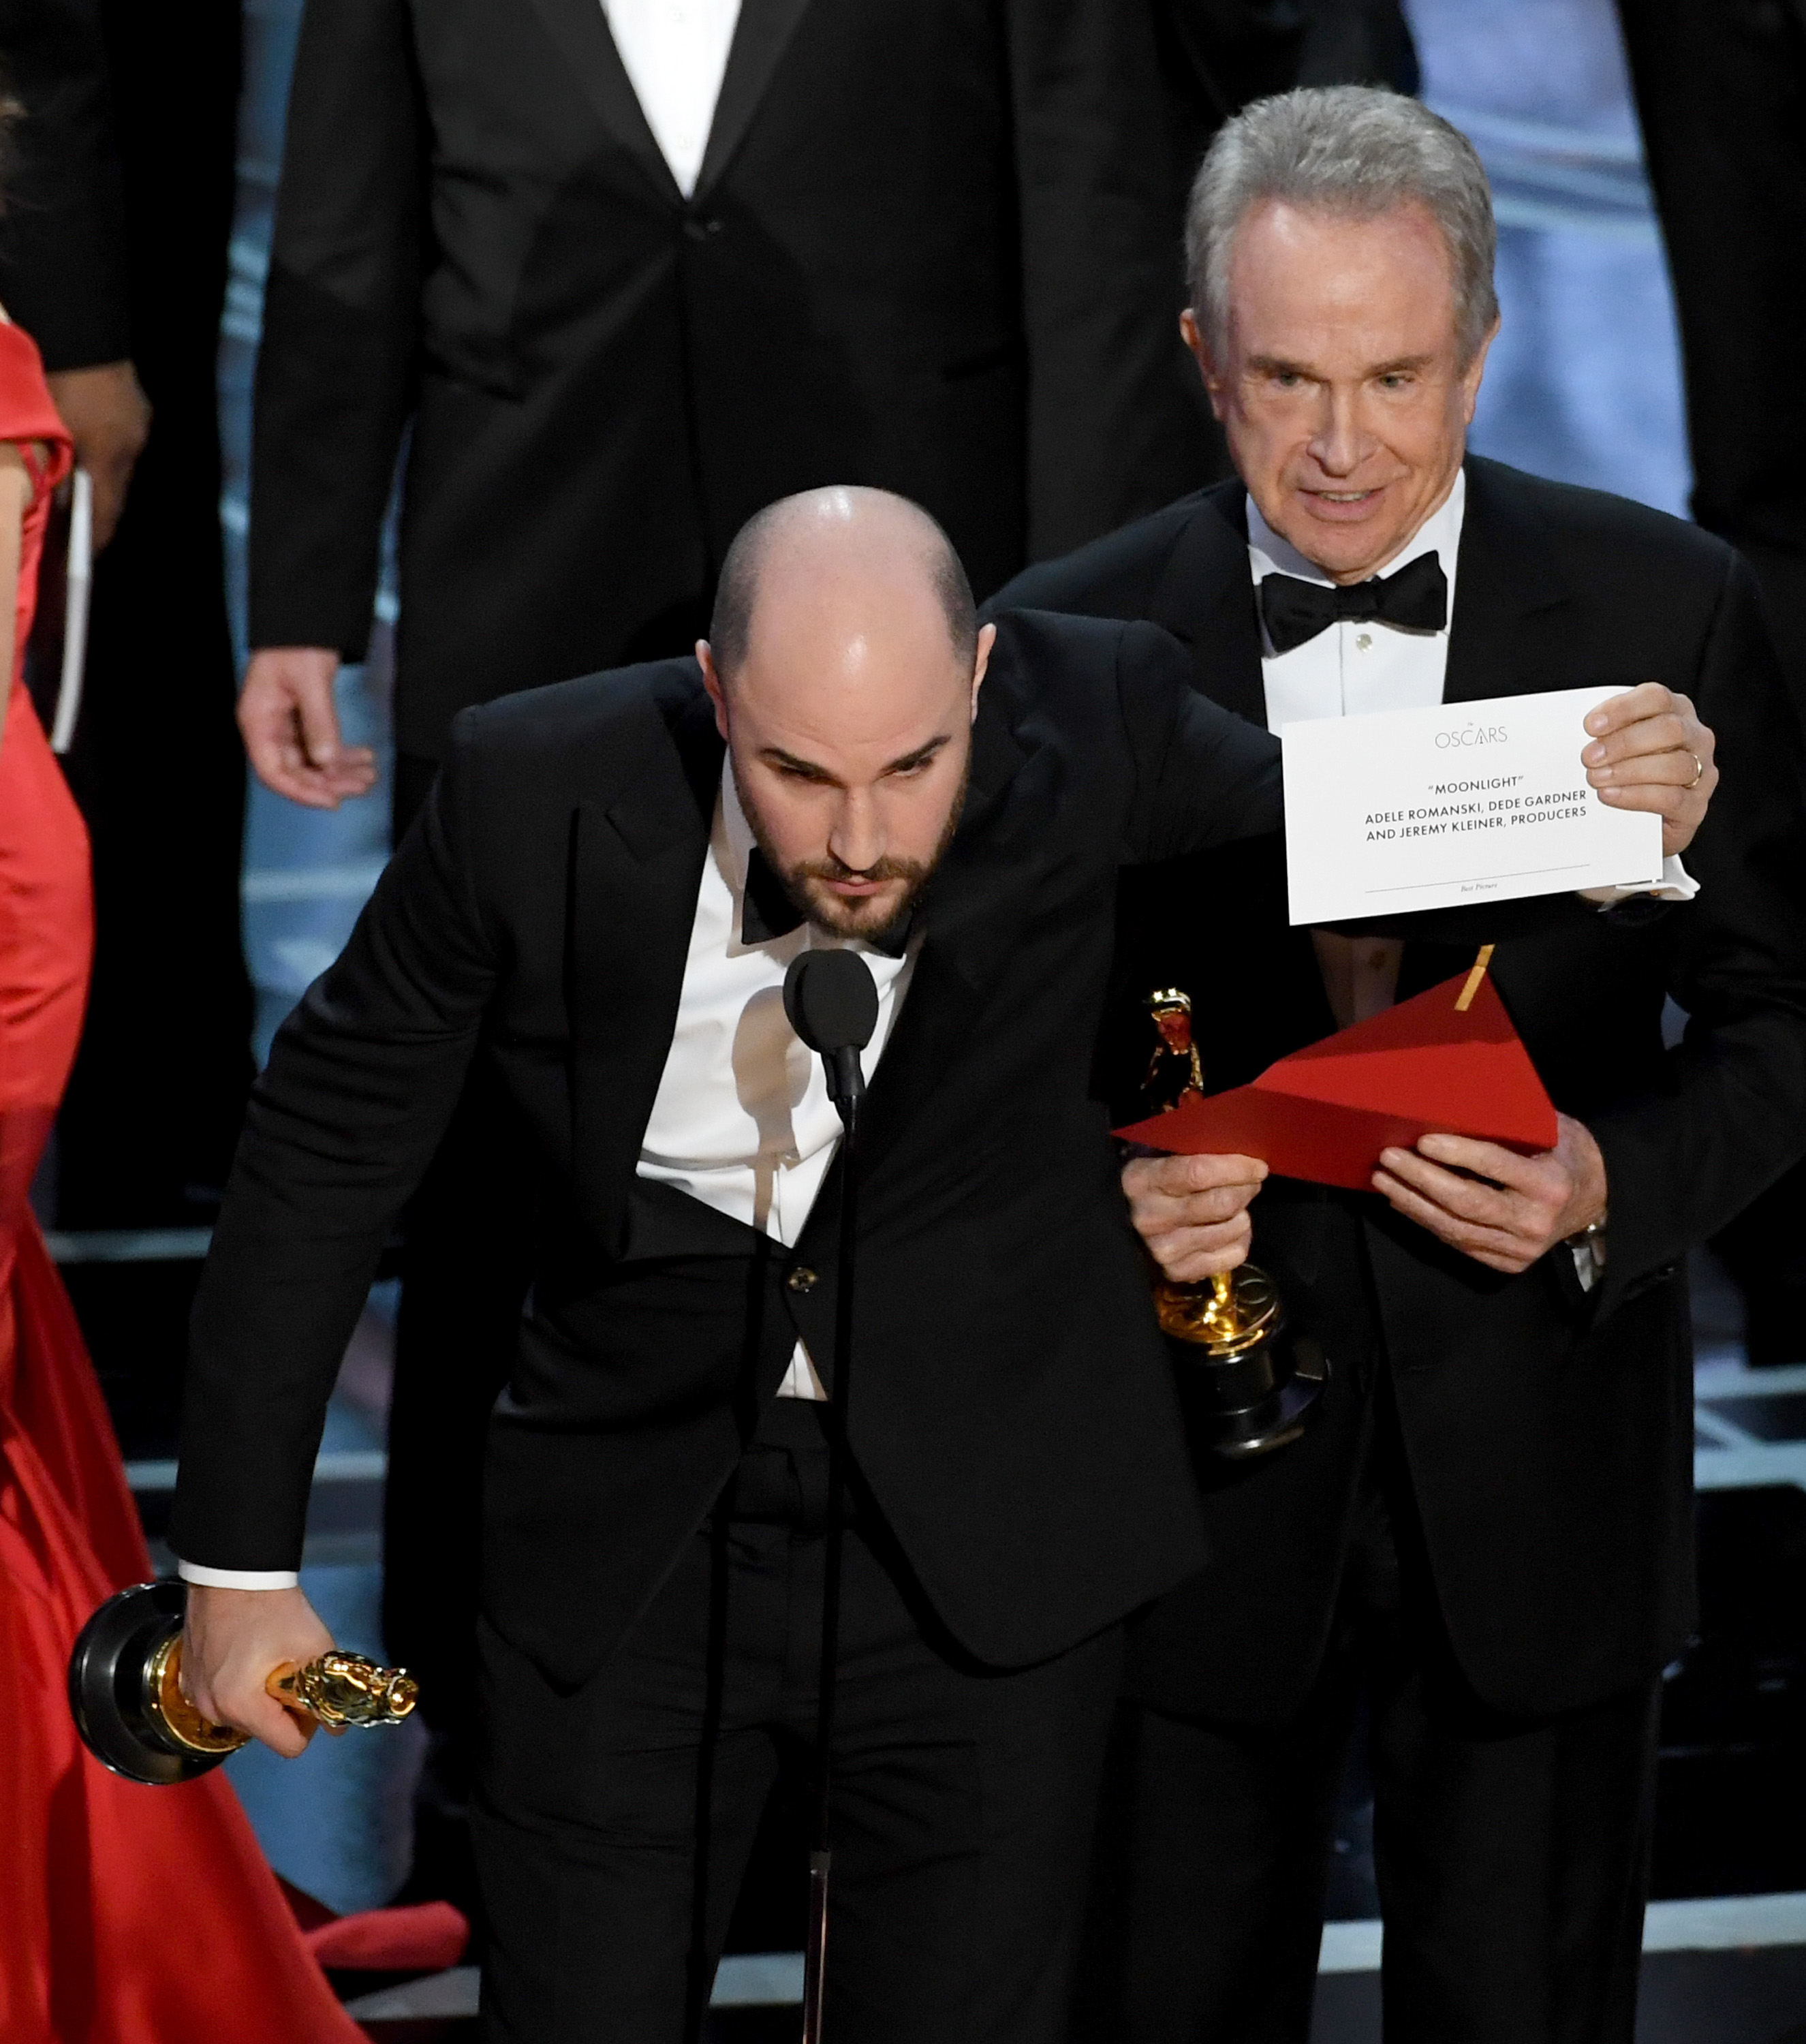 HOLLYWOOD, CA - FEBRUARY 26: 'La La Land' producer Jordan Horowitz (L) holds up the winner card reading actual Best Picture winner 'Moonlight' after a presentation error with actor Warren Beatty onstage during the 89th Annual Academy Awards at Hollywood & Highland Center on February 26, 2017 in Hollywood, California. Kevin Winter/Getty Images/AFP